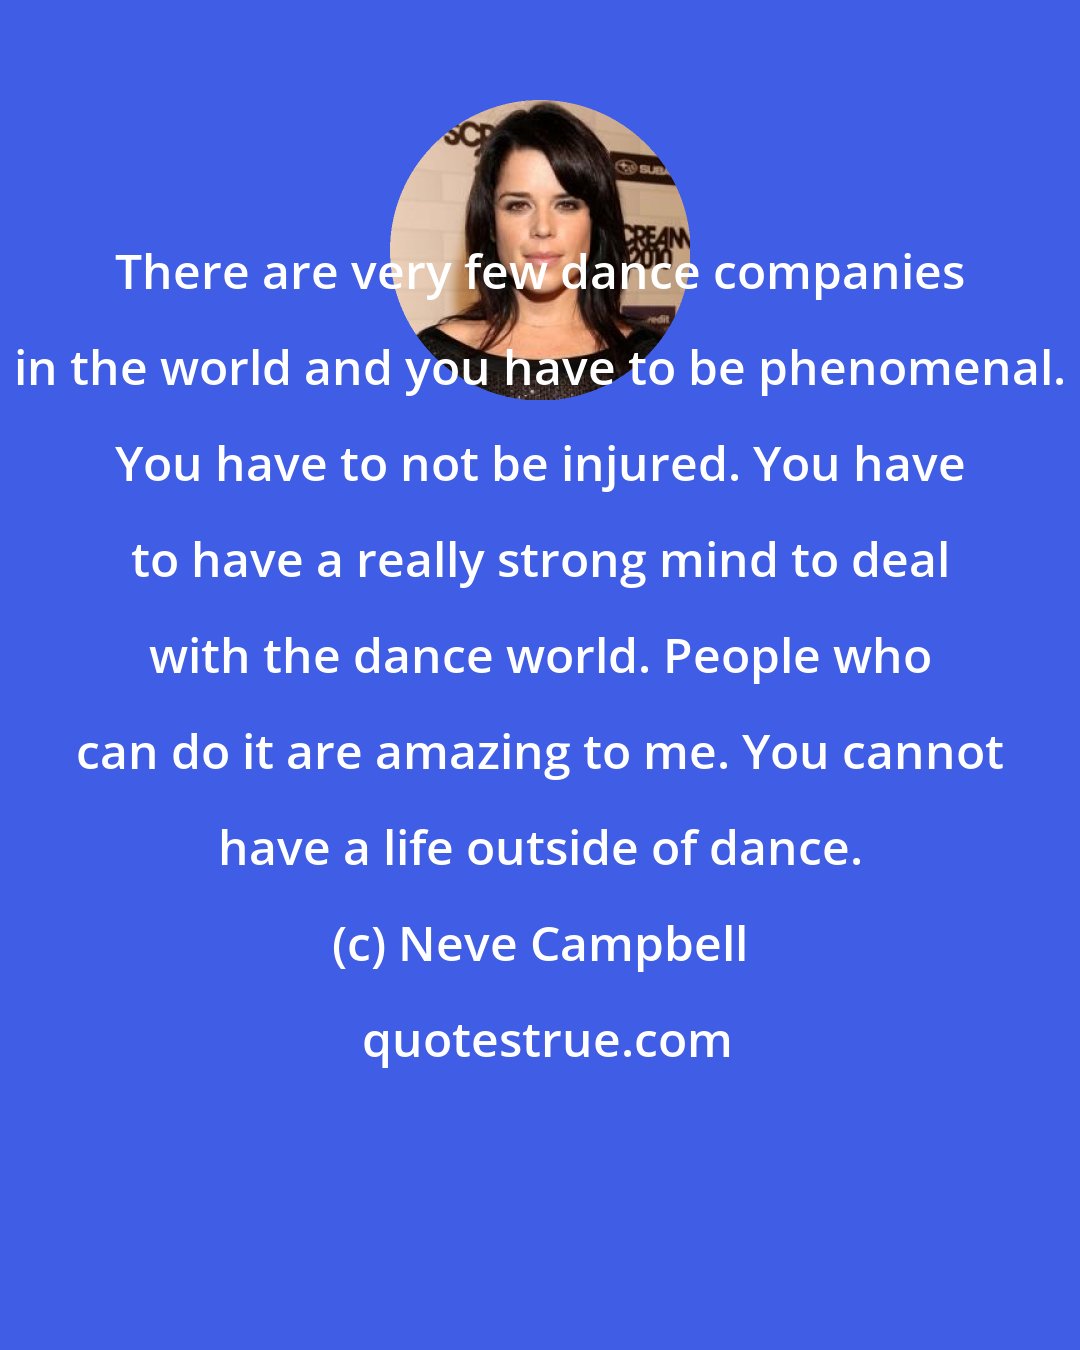 Neve Campbell: There are very few dance companies in the world and you have to be phenomenal. You have to not be injured. You have to have a really strong mind to deal with the dance world. People who can do it are amazing to me. You cannot have a life outside of dance.